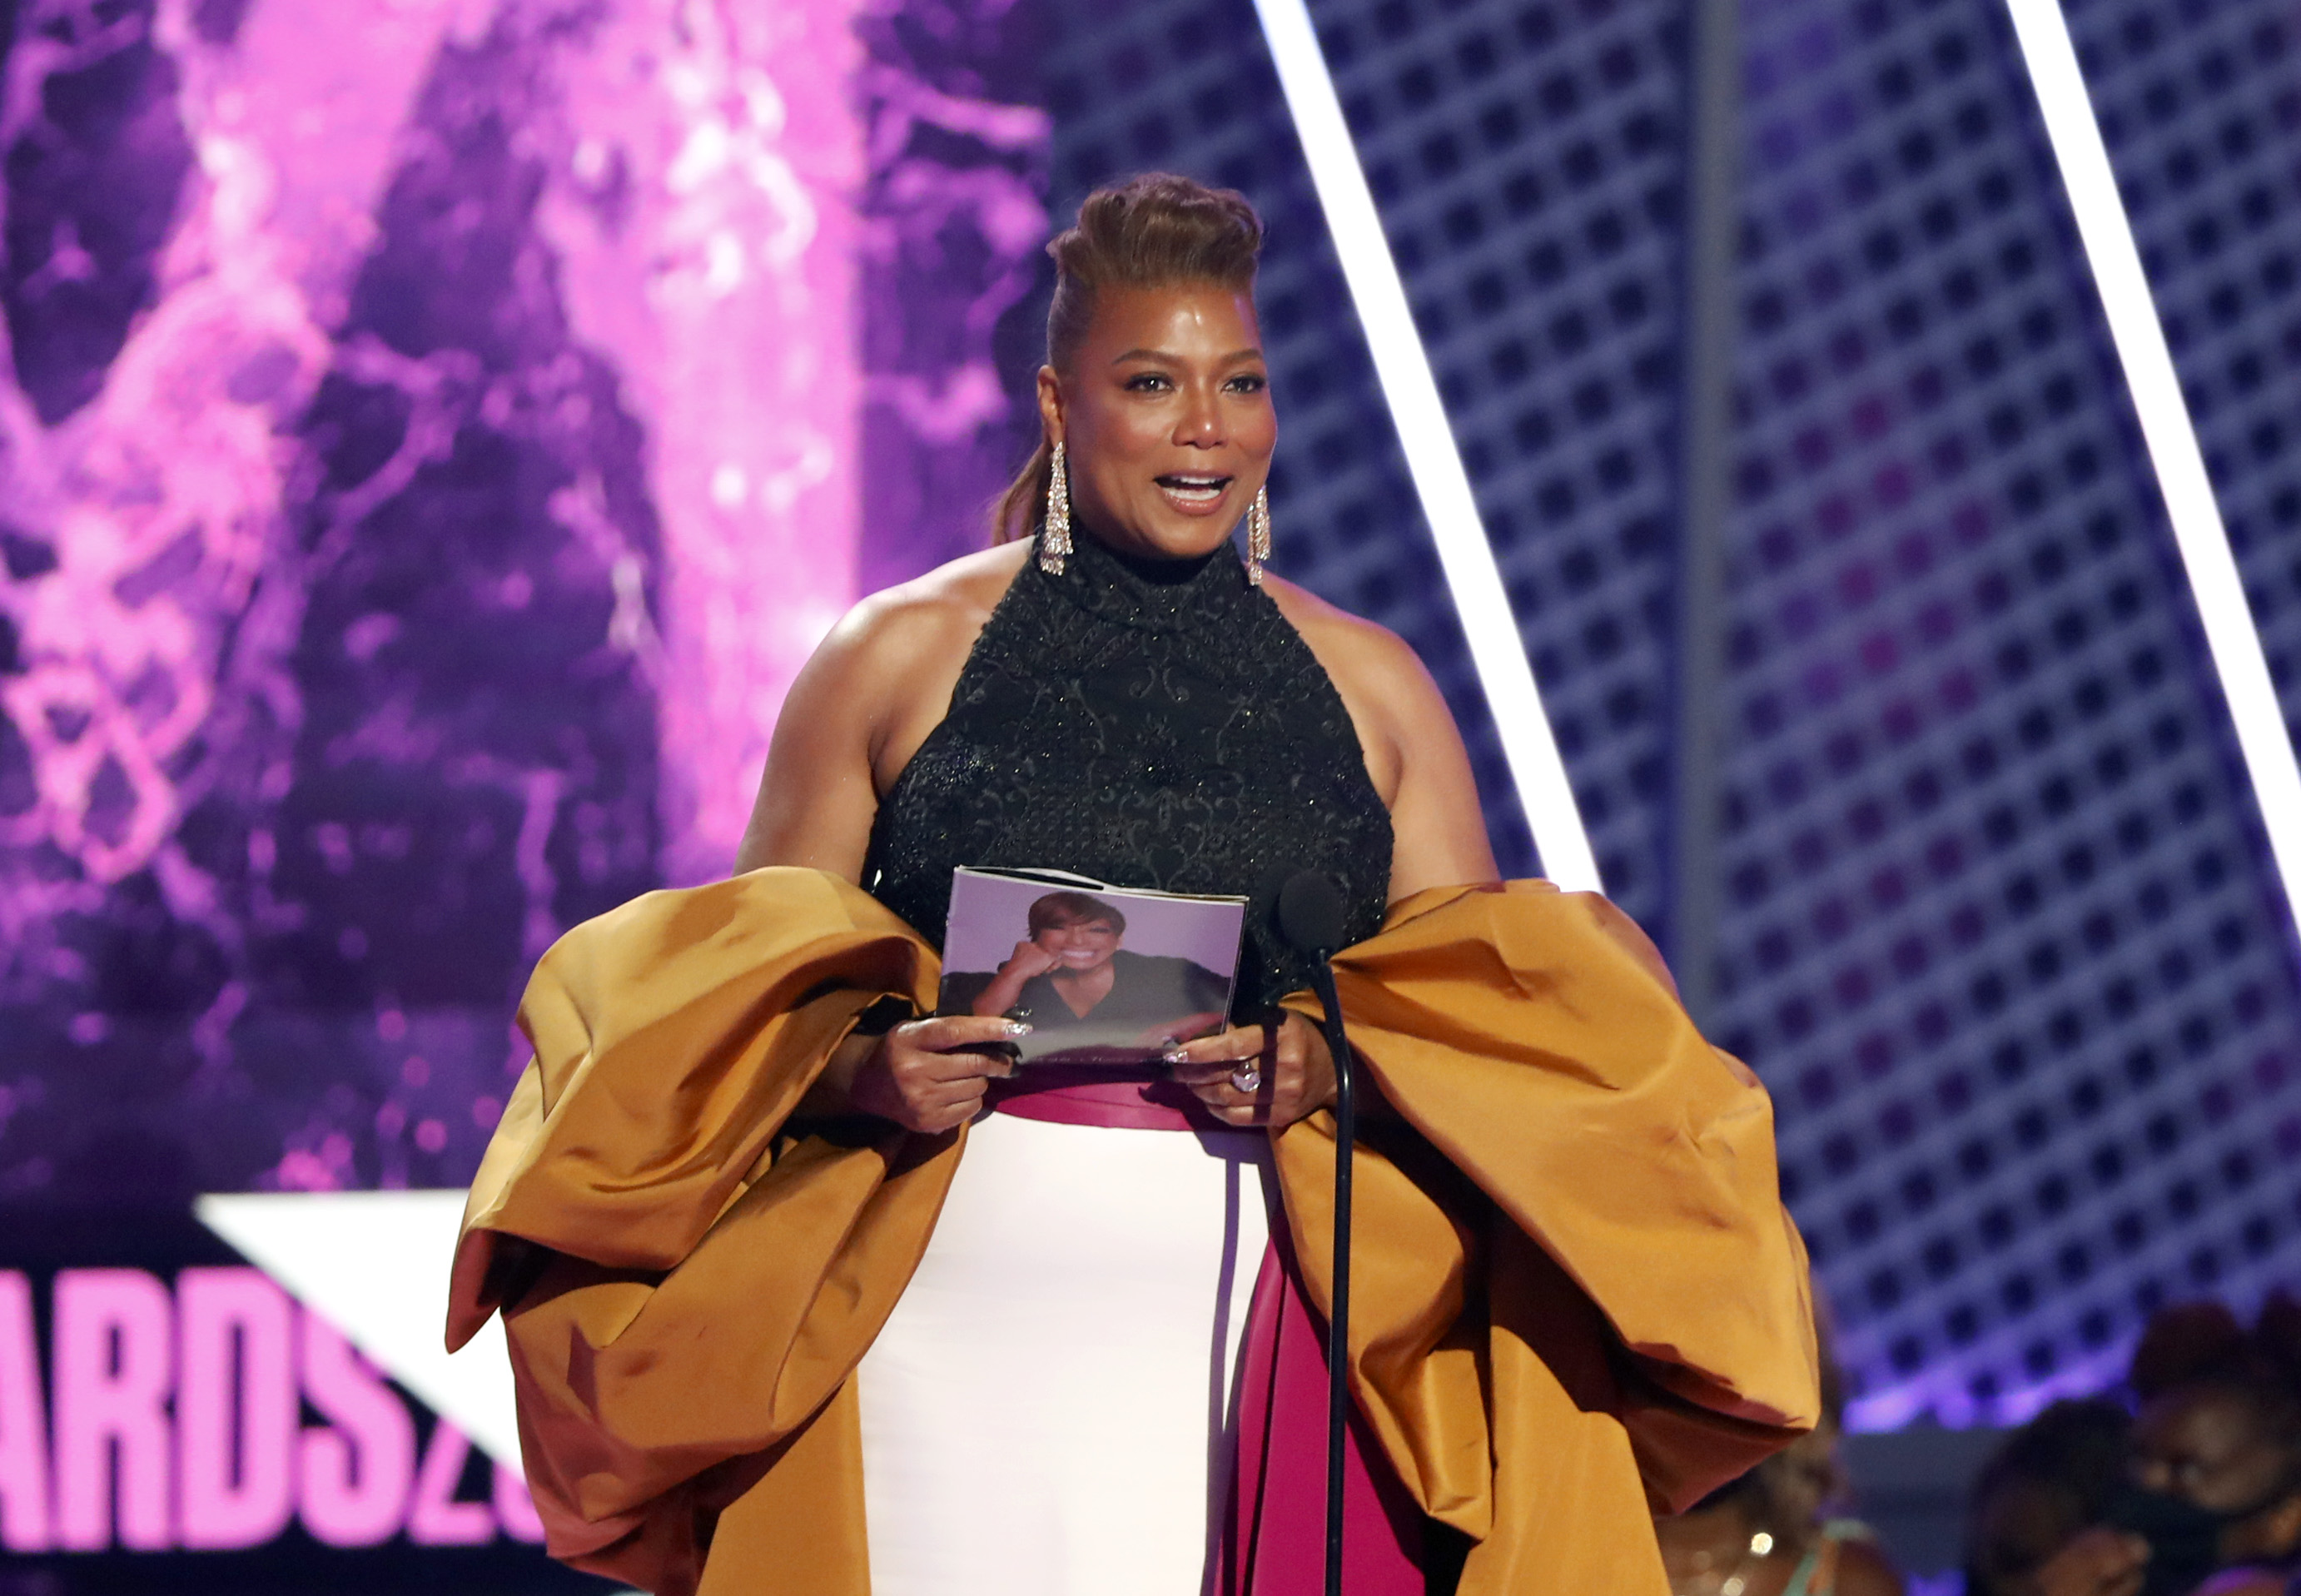 Watch Queen Latifah accept BET Awards honor, musical tribute to